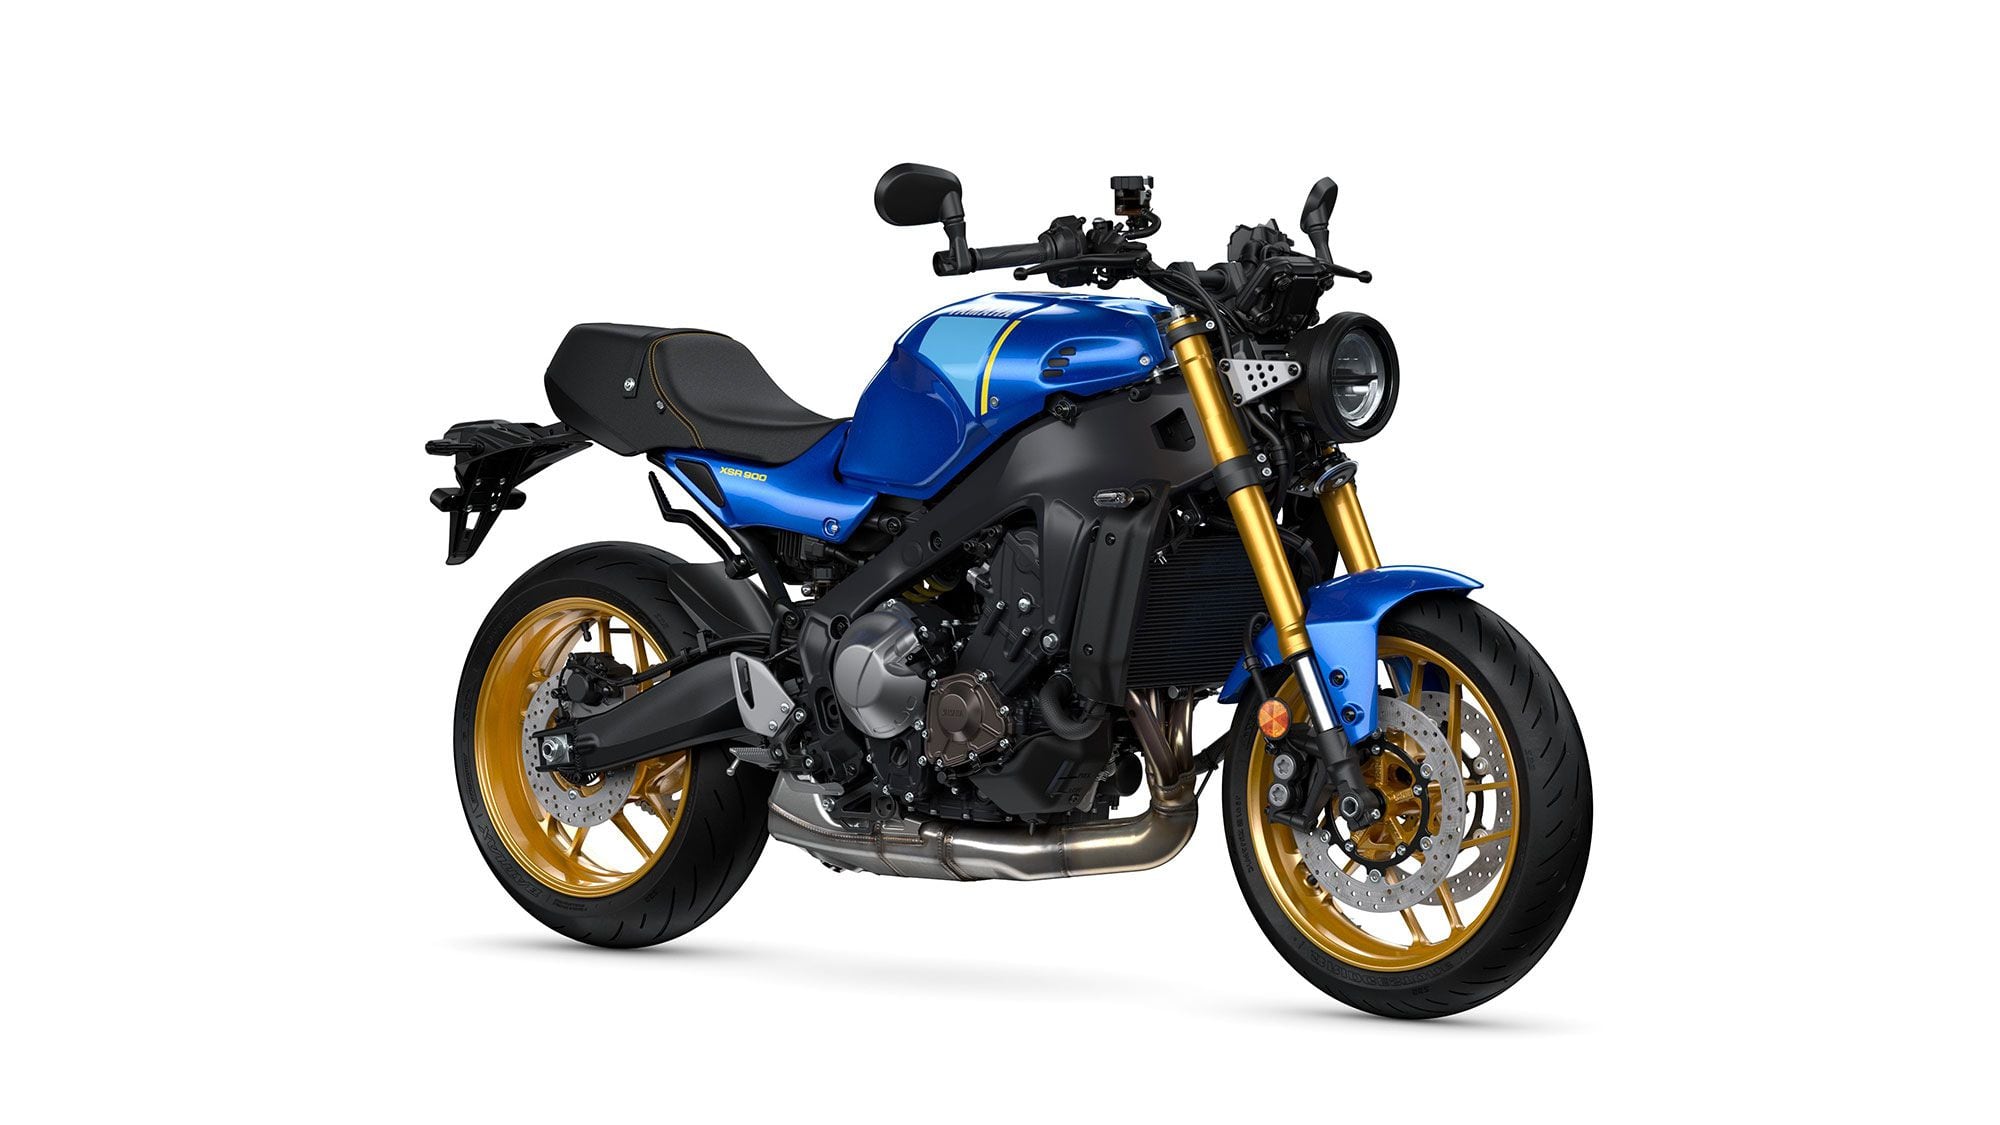 New look recalls 1980s sportbike styling, while a Legend Blue and gold-accented colorway is a riff on Yamaha’s racing past.